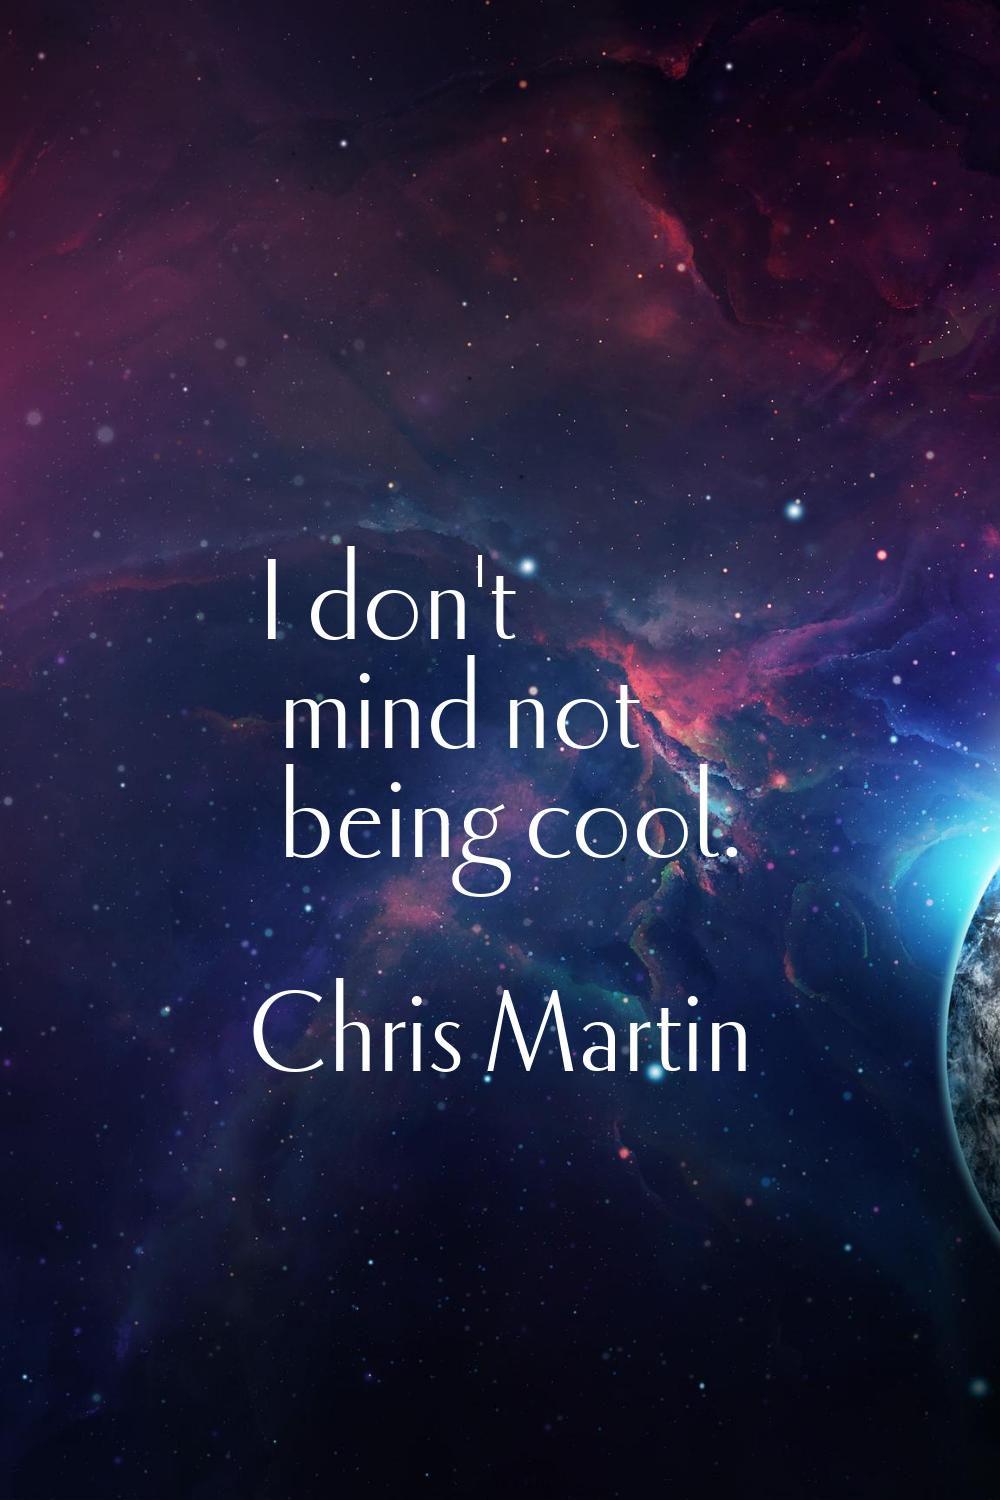 I don't mind not being cool.